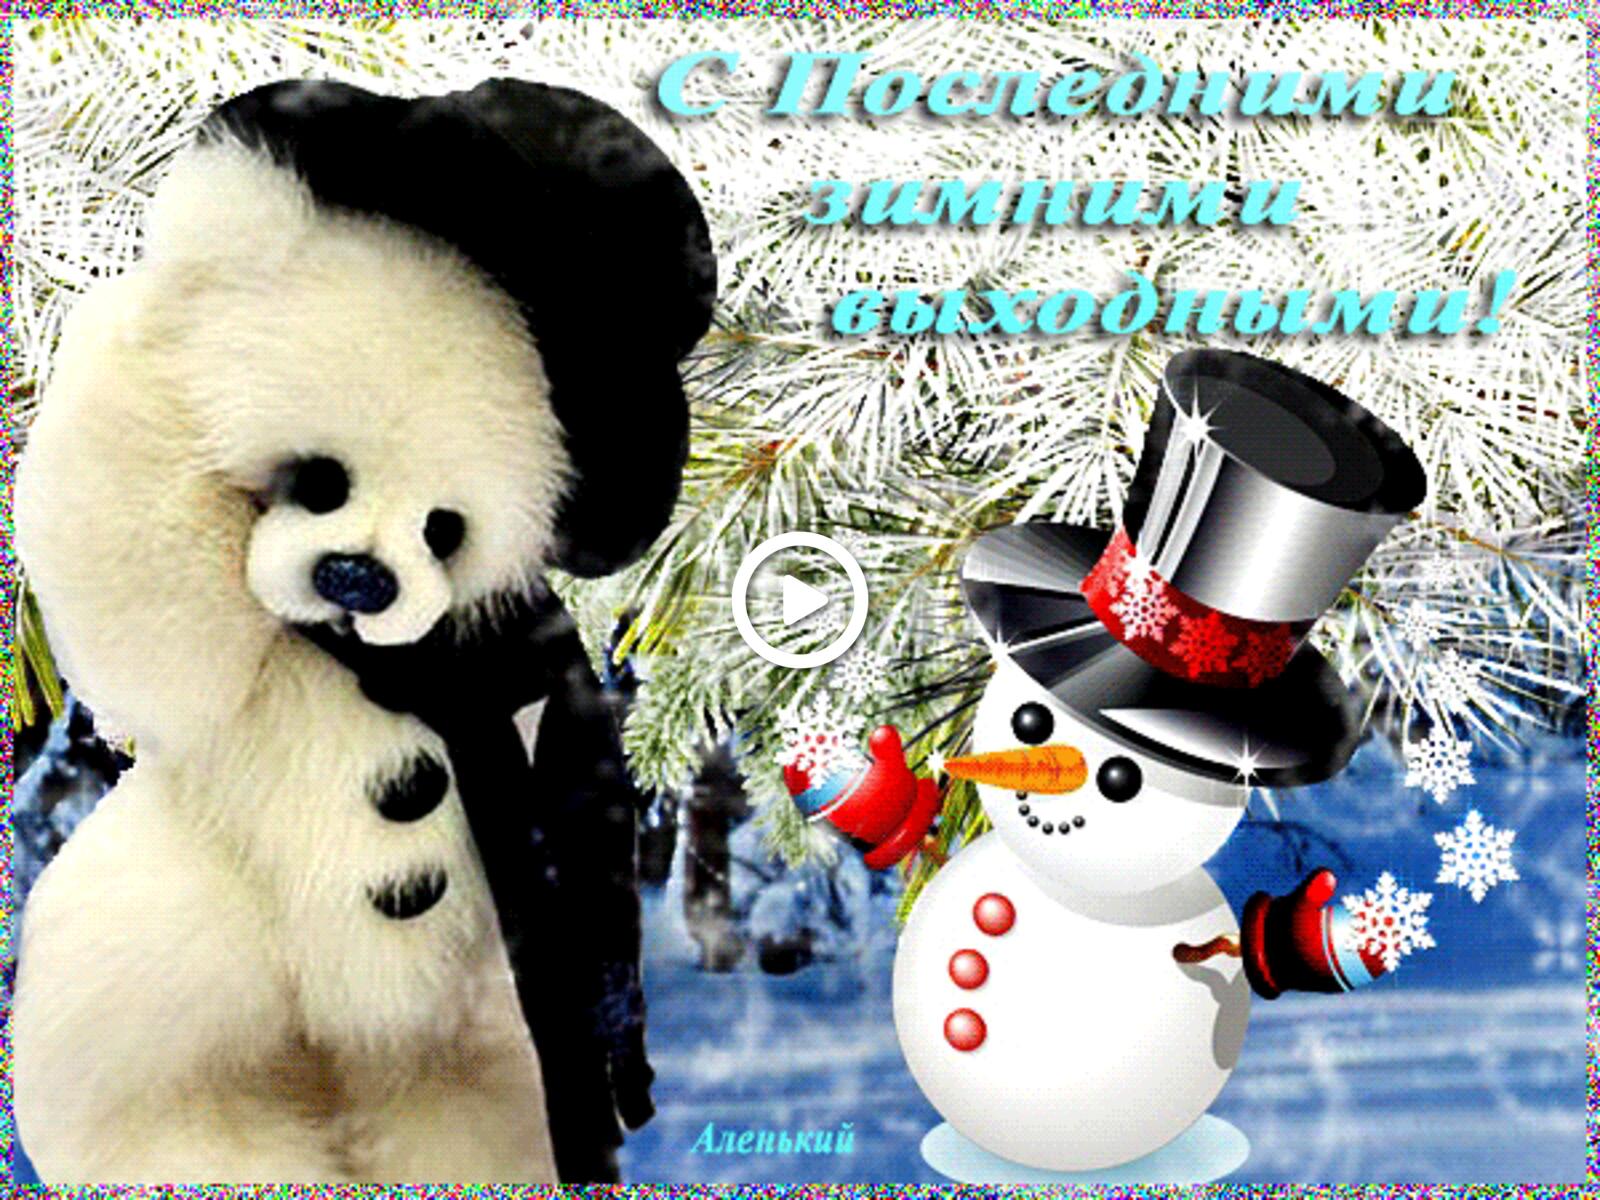 happy last sunday of the year happy last sunday in december have a nice winter weekend